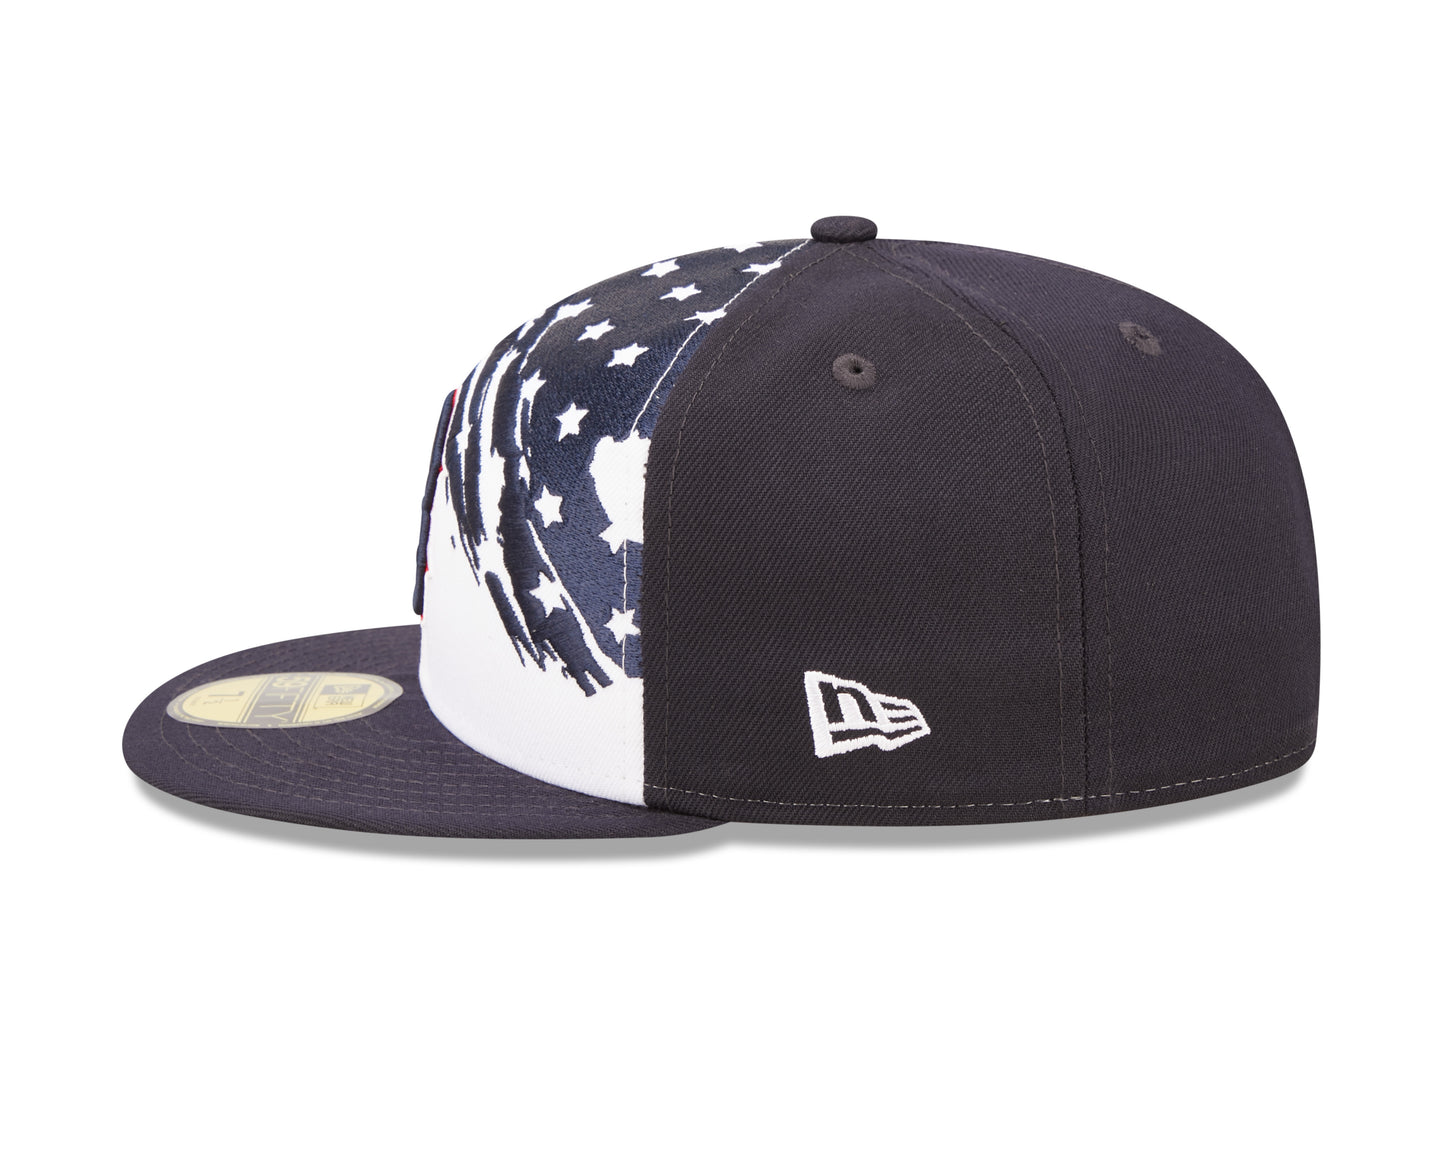 Boston Red Sox Stars and Stripes July 4th 59fifty Fitted Hats